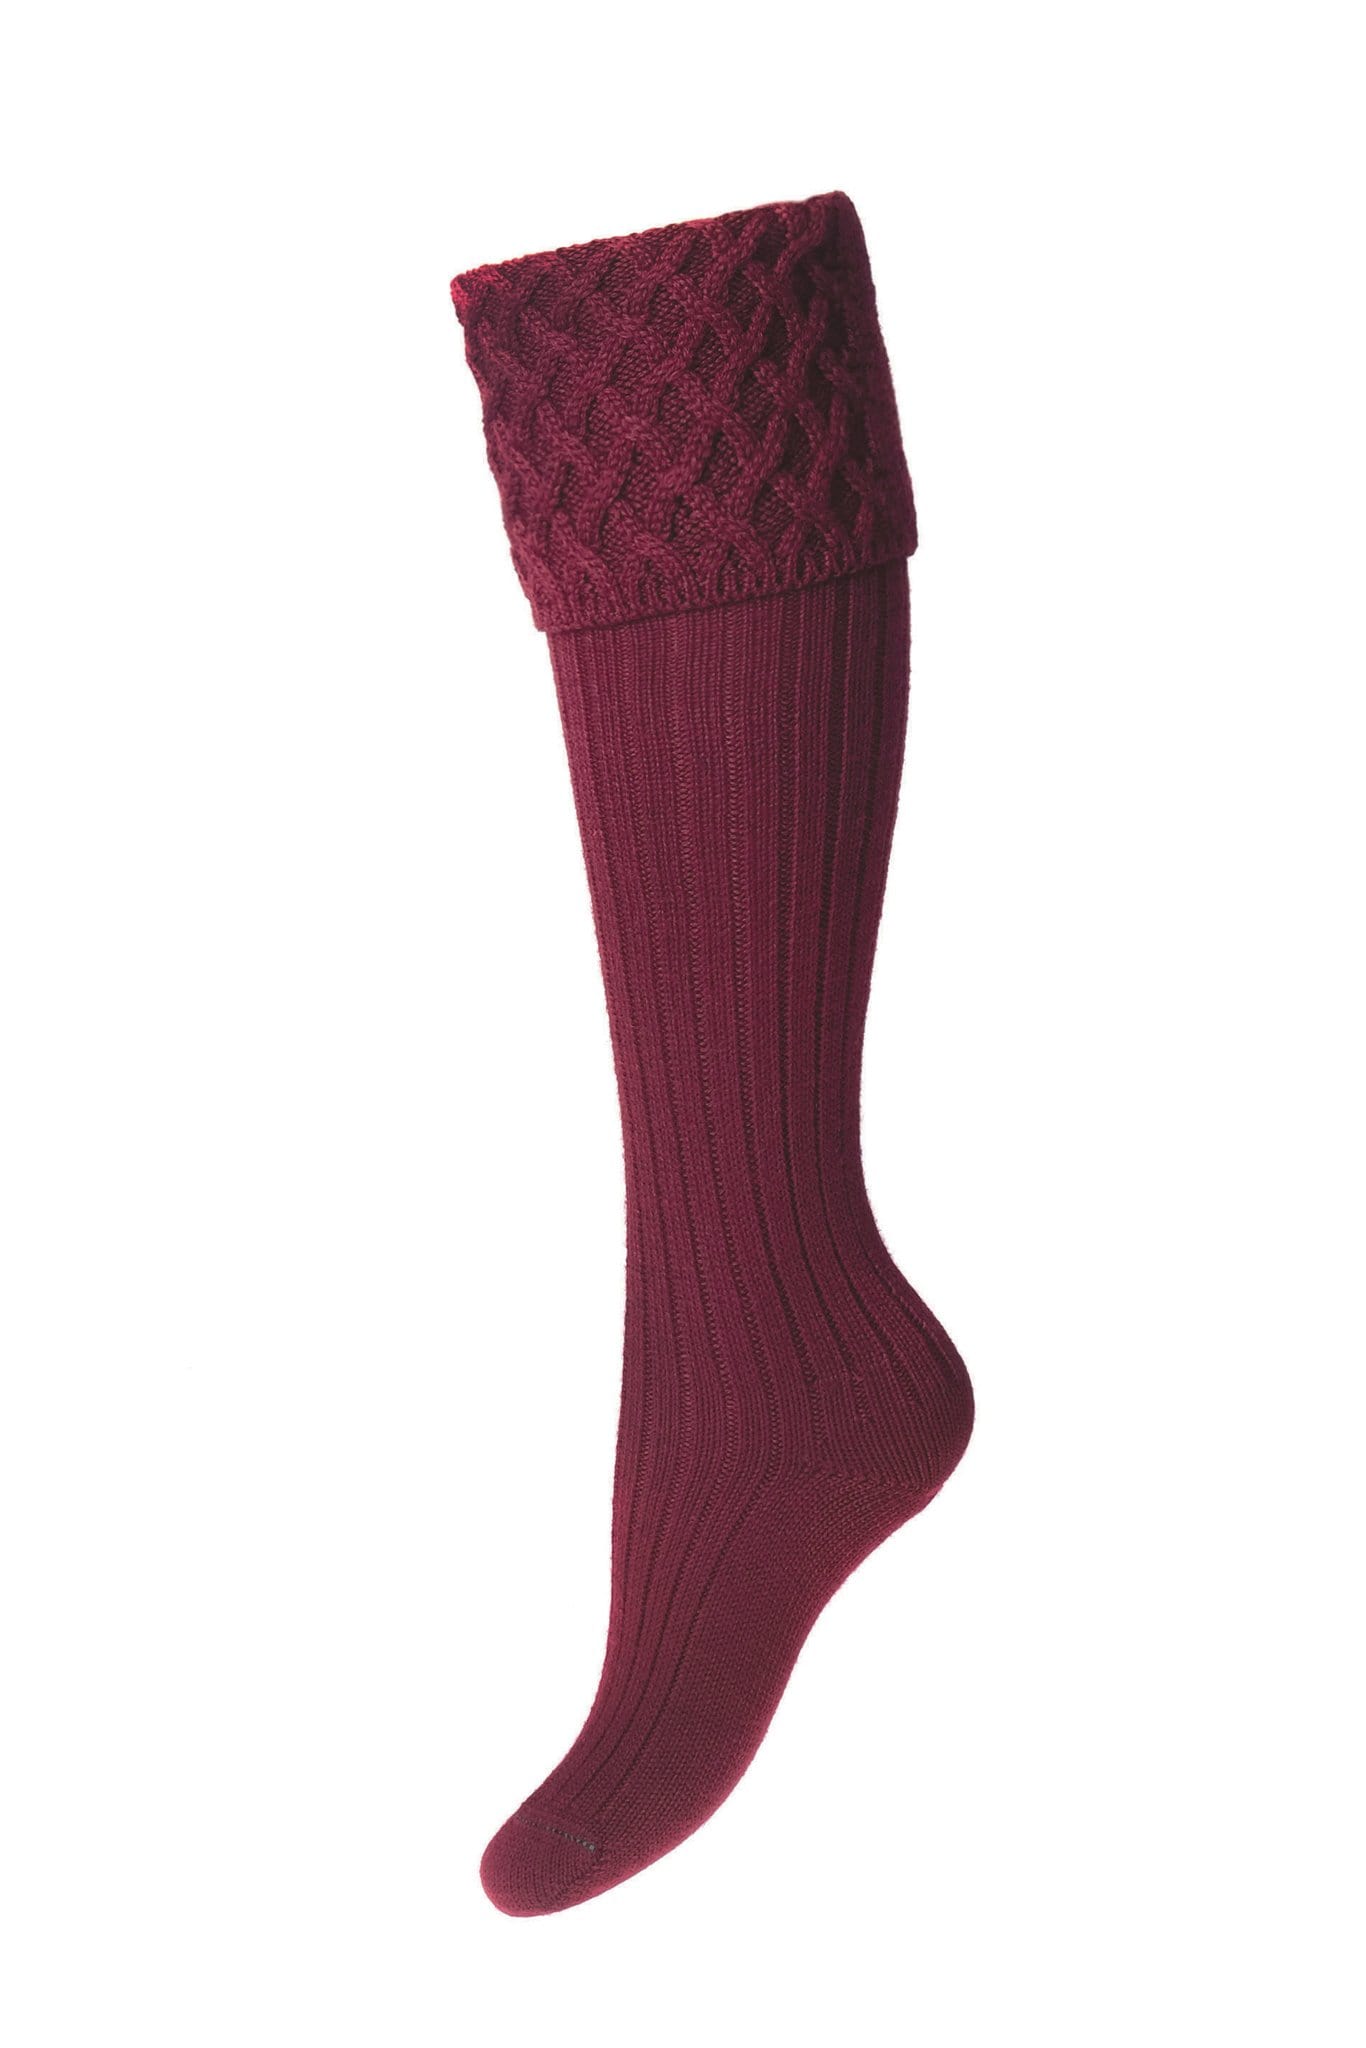 House of Cheviot Gloves House of Cheviot Ladies Wrist Warmers Burgundy